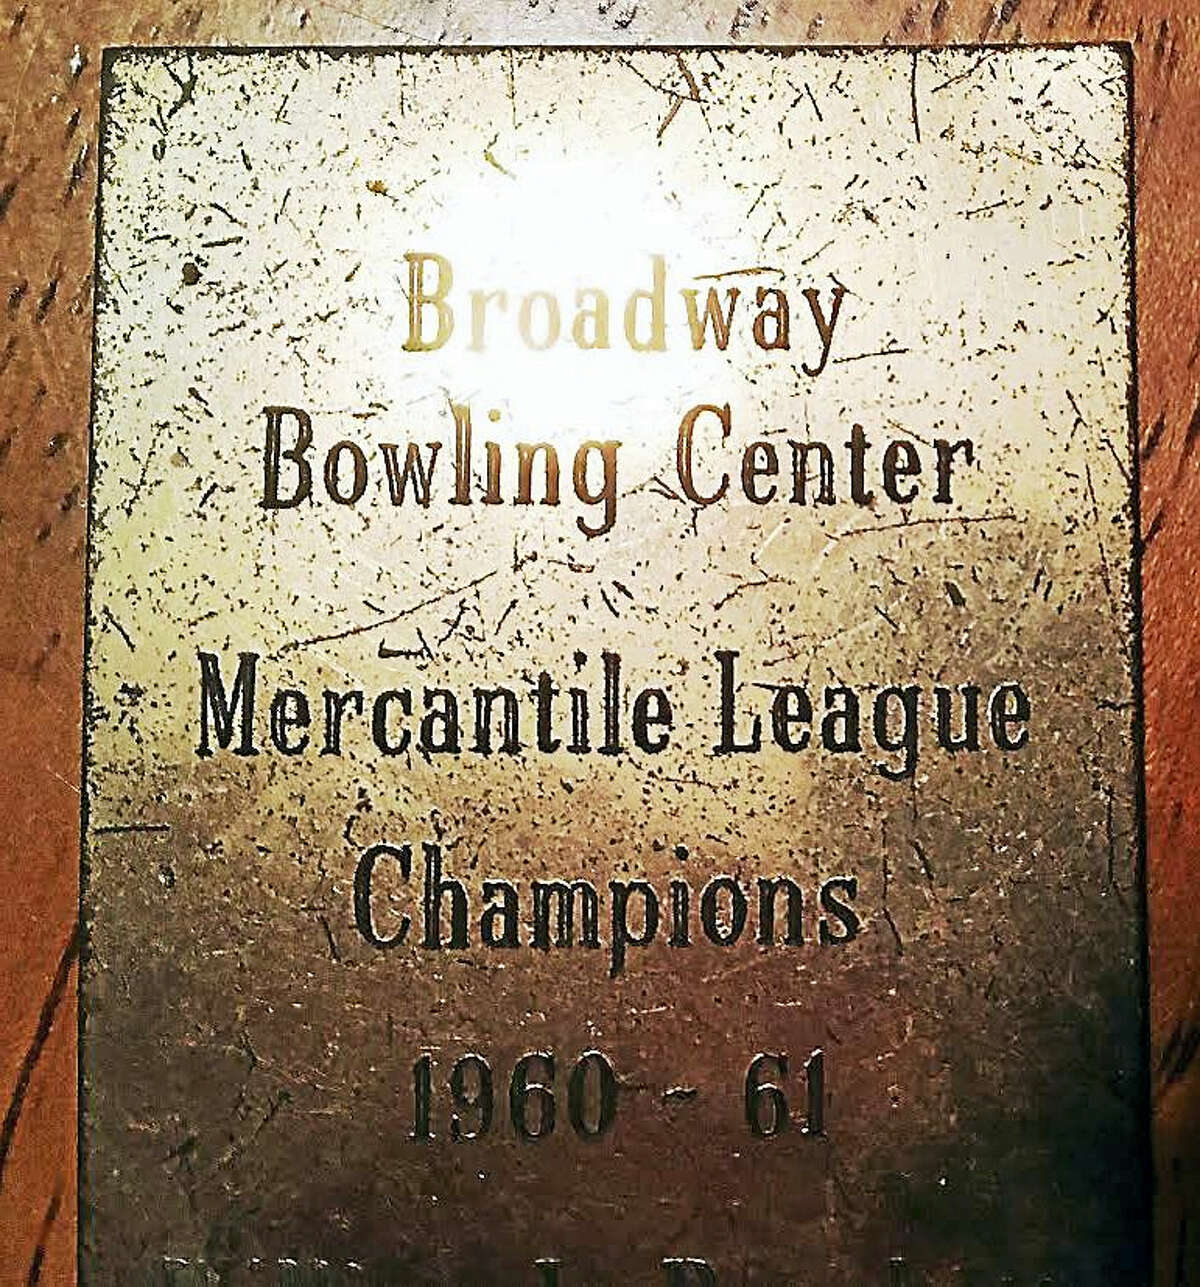 A commemorative plate from New Haven’s long-gone Broadway Bowling Center.